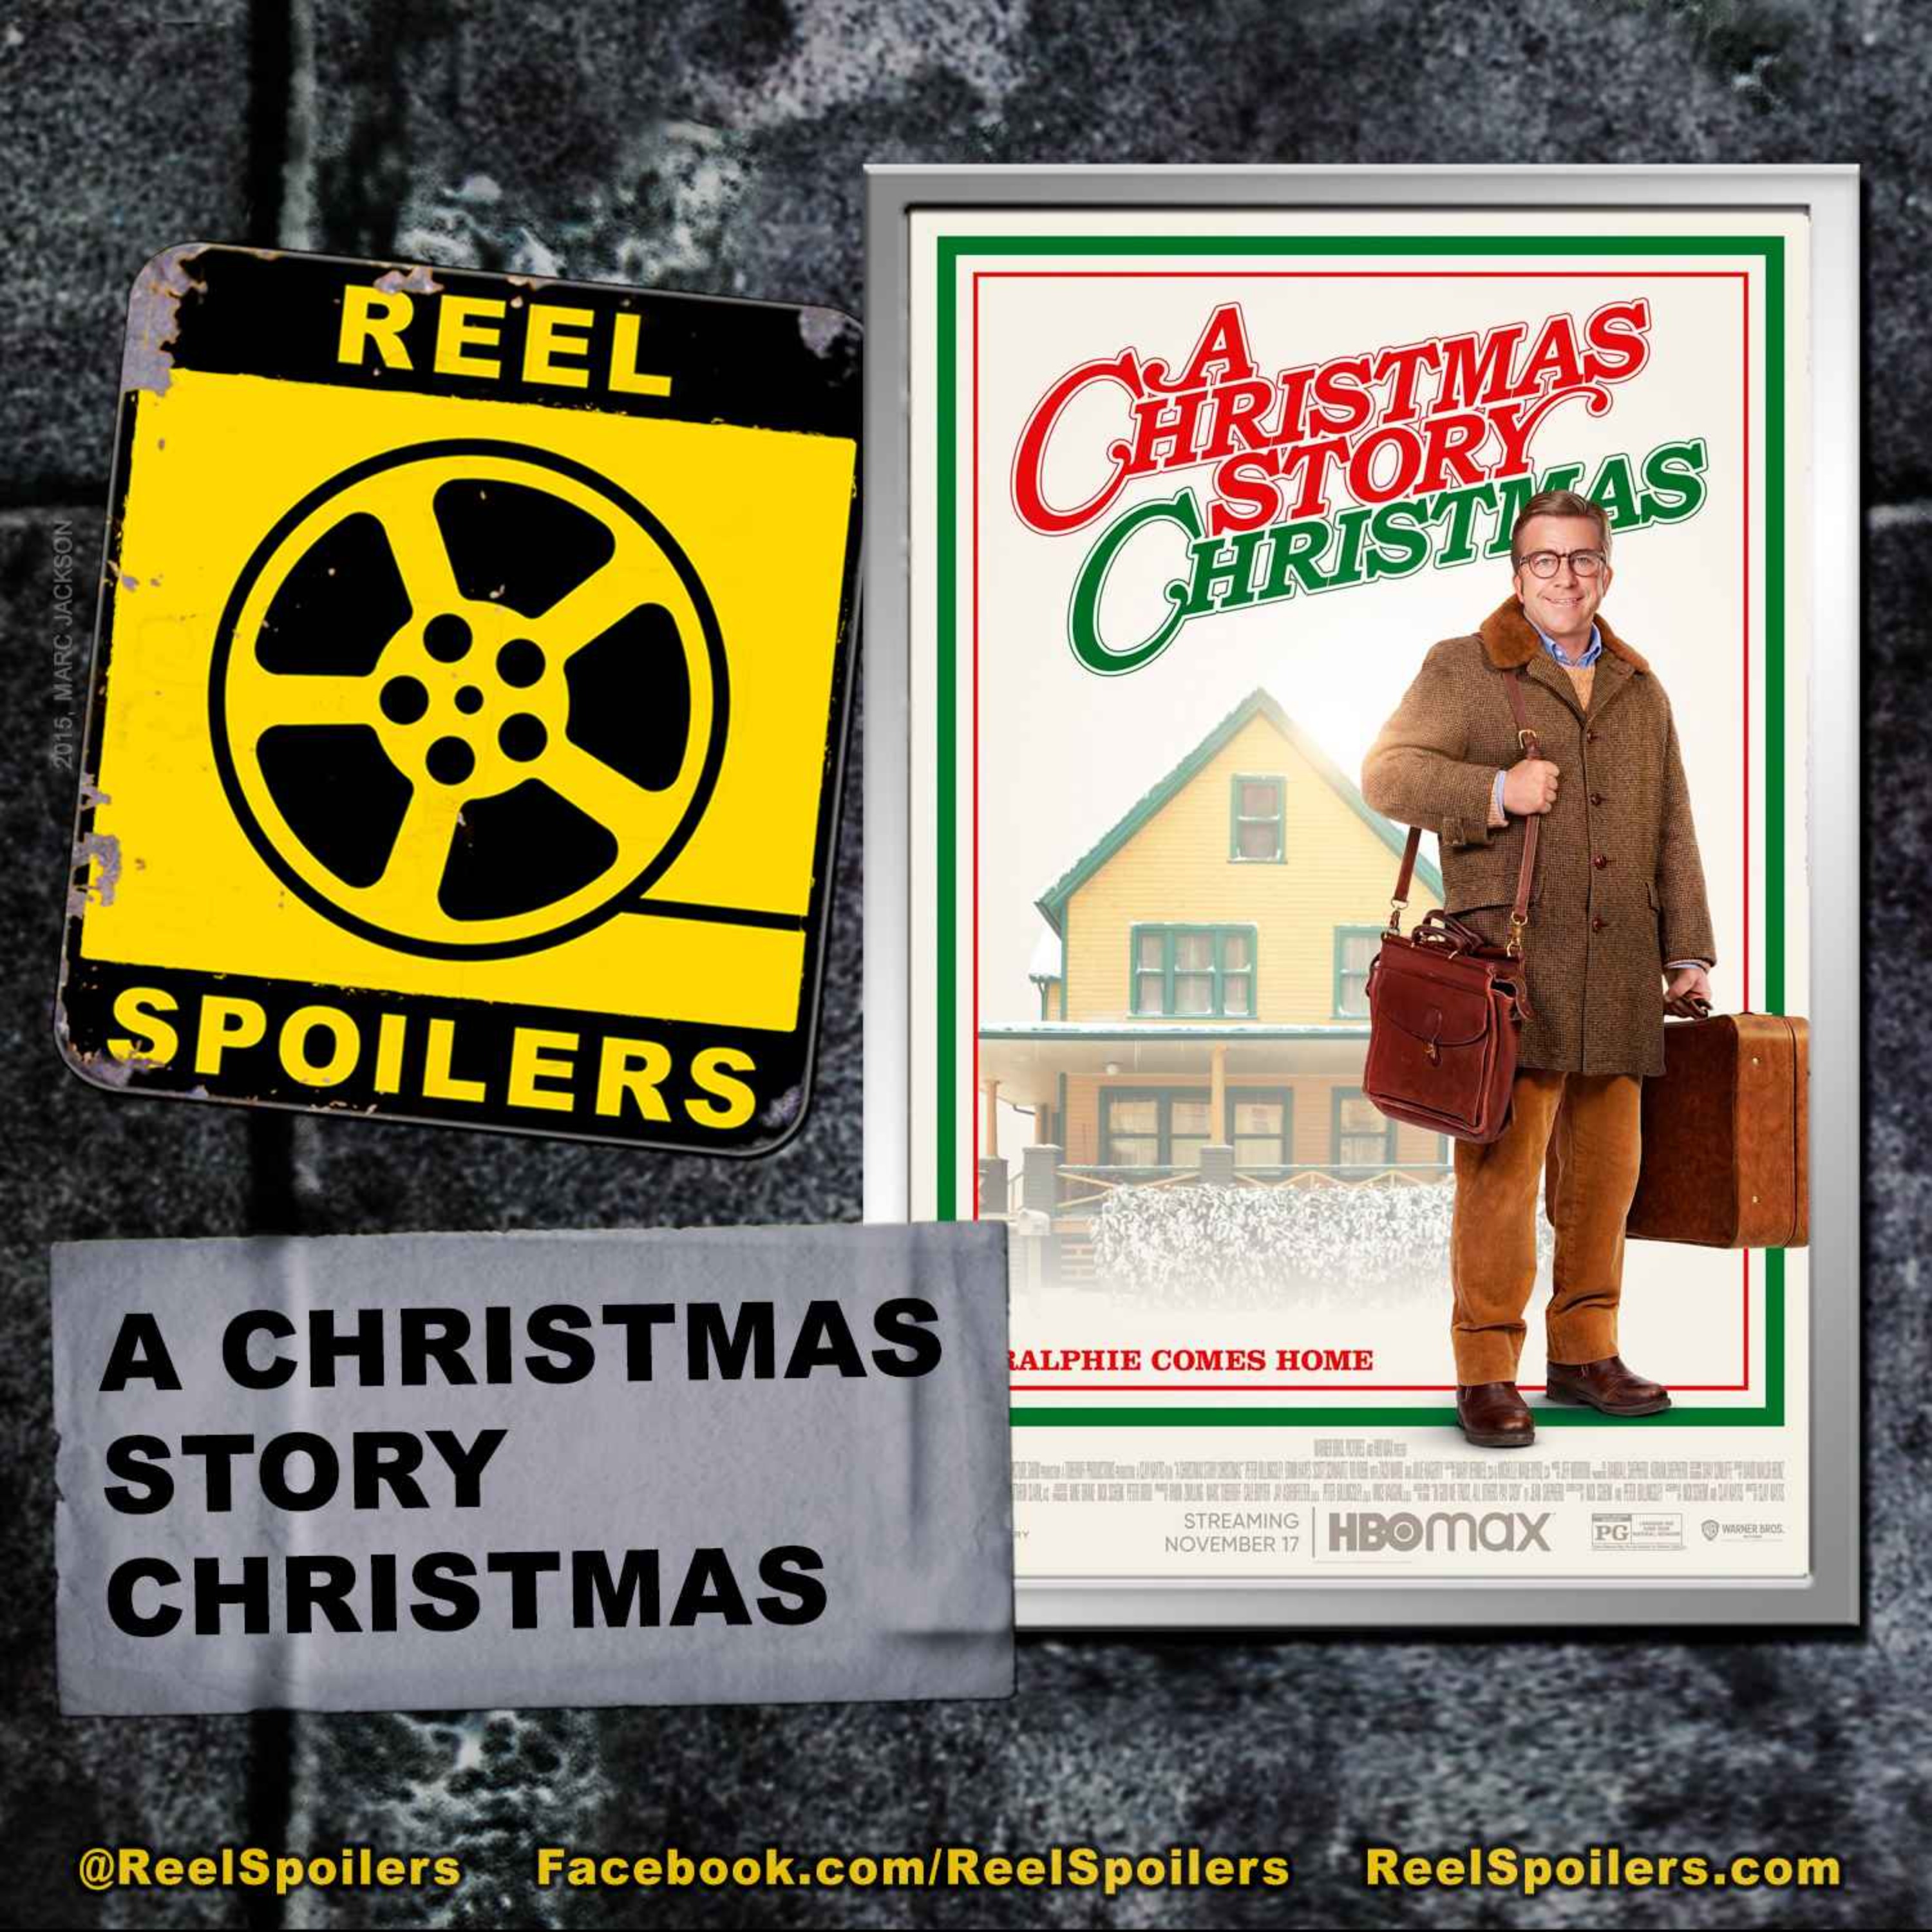 A CHRISTMAS STORY CHRISTMAS Starring Peter Billingsley, Erinn Hayes, River Drosche